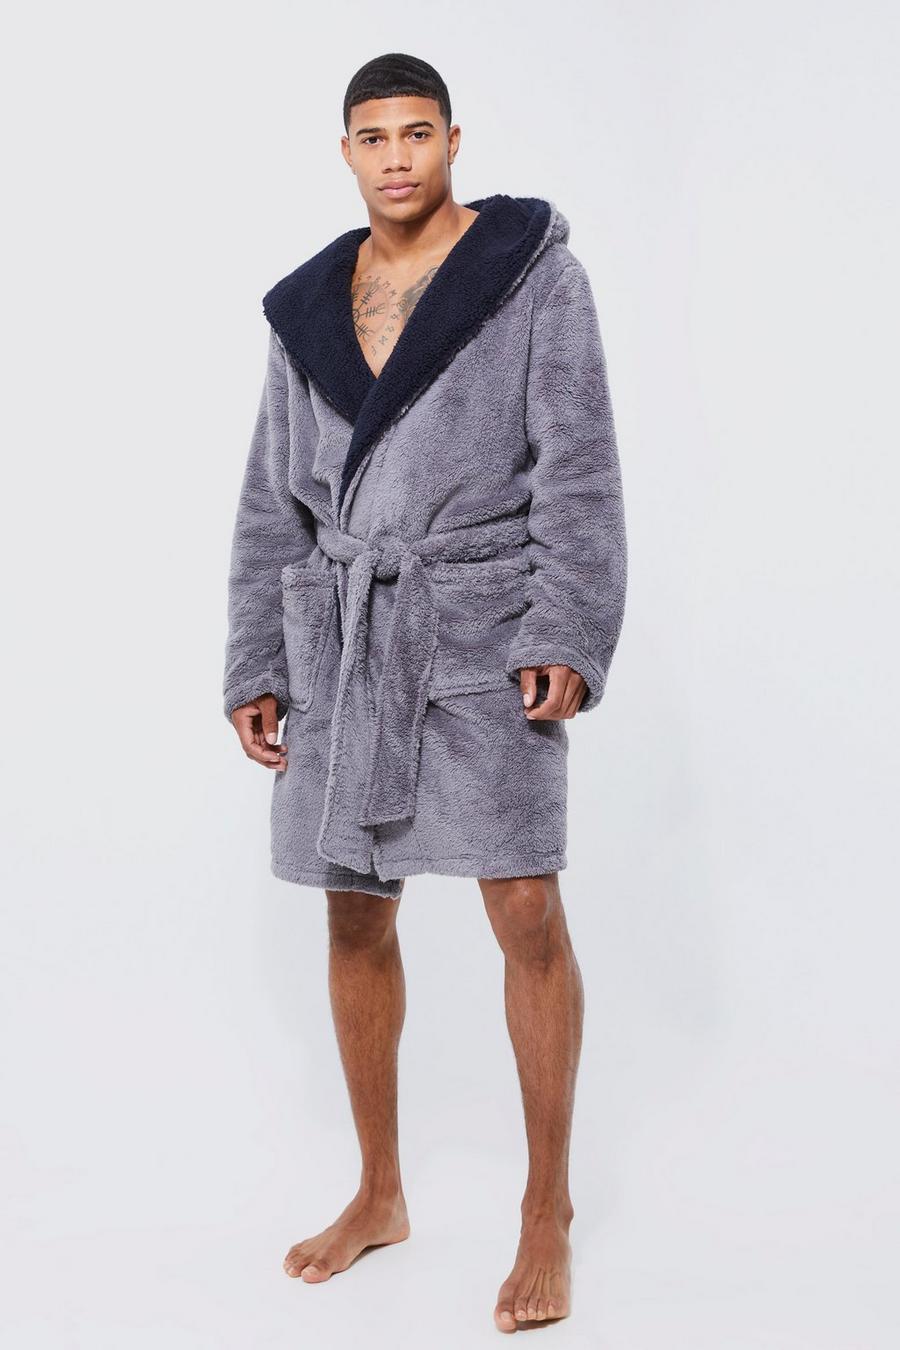 Charcoal grigio Borg Lined Hooded Dressing Gown 